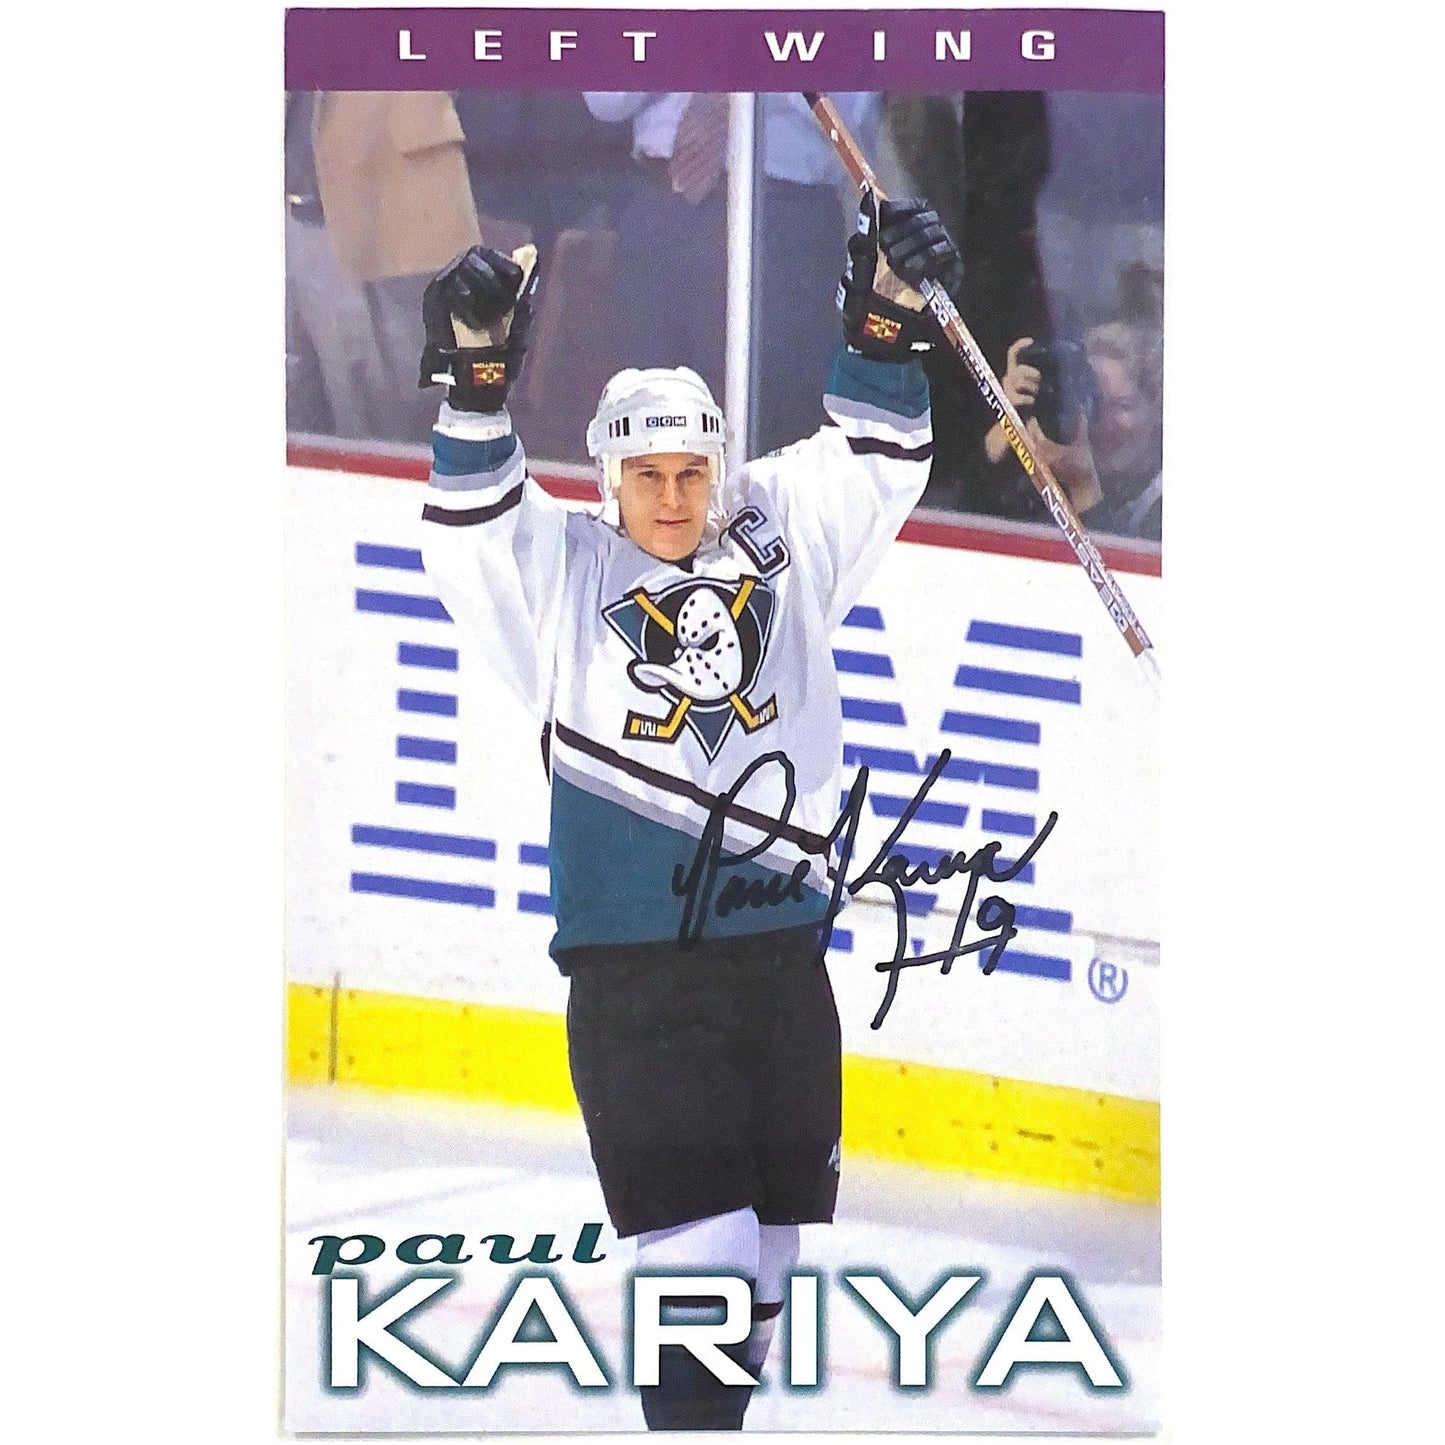  Signed Paul Kariya Photograph Card 5.5”x8.5” - Info on Back  Local Legends Cards & Collectibles